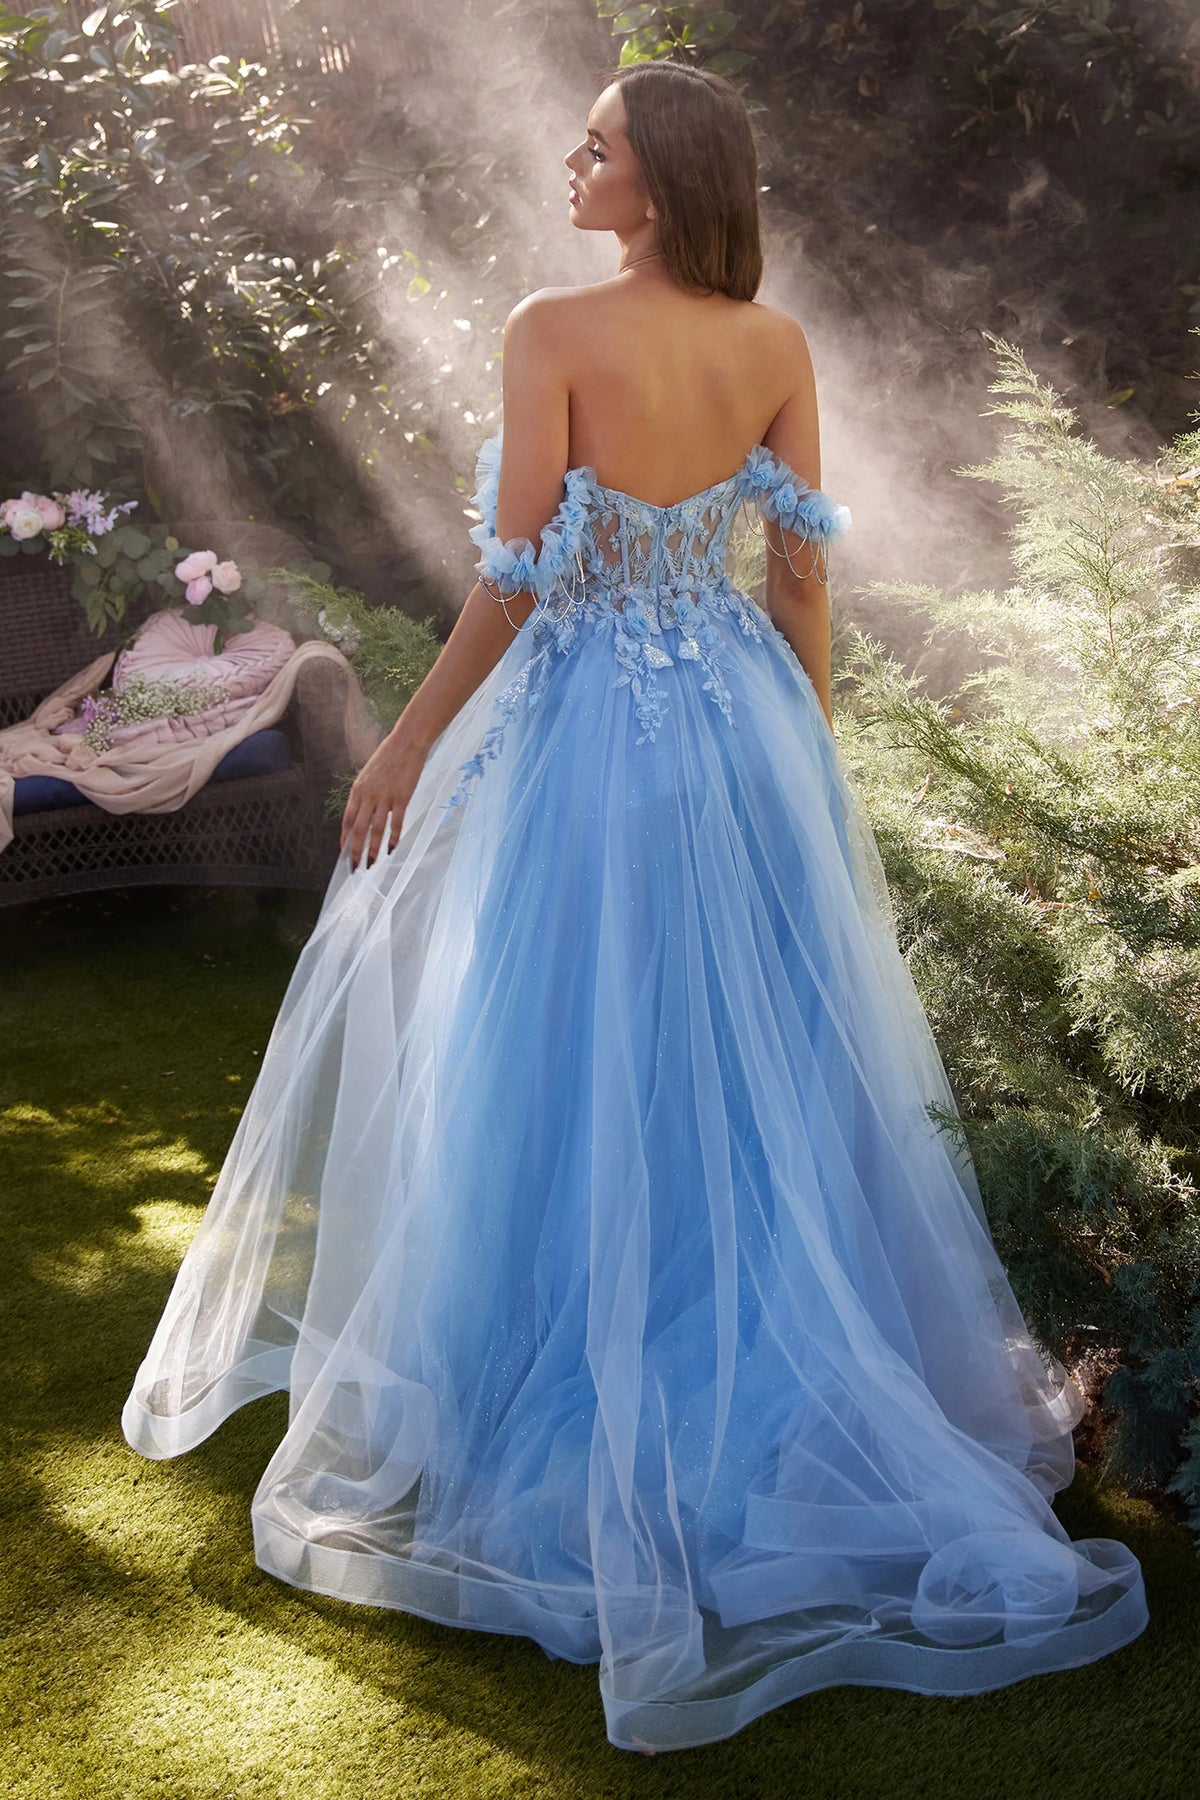 Andrea&Leo A1237 Sparkling Off-Shoulder A-Line Prom Gown - A breathtaking A-line gown with a sheer boned bodice adorned with delicate lace appliqué, off-the-shoulder straps embellished with a sparkling rhinestone drape, perfect for prom and special occasions.